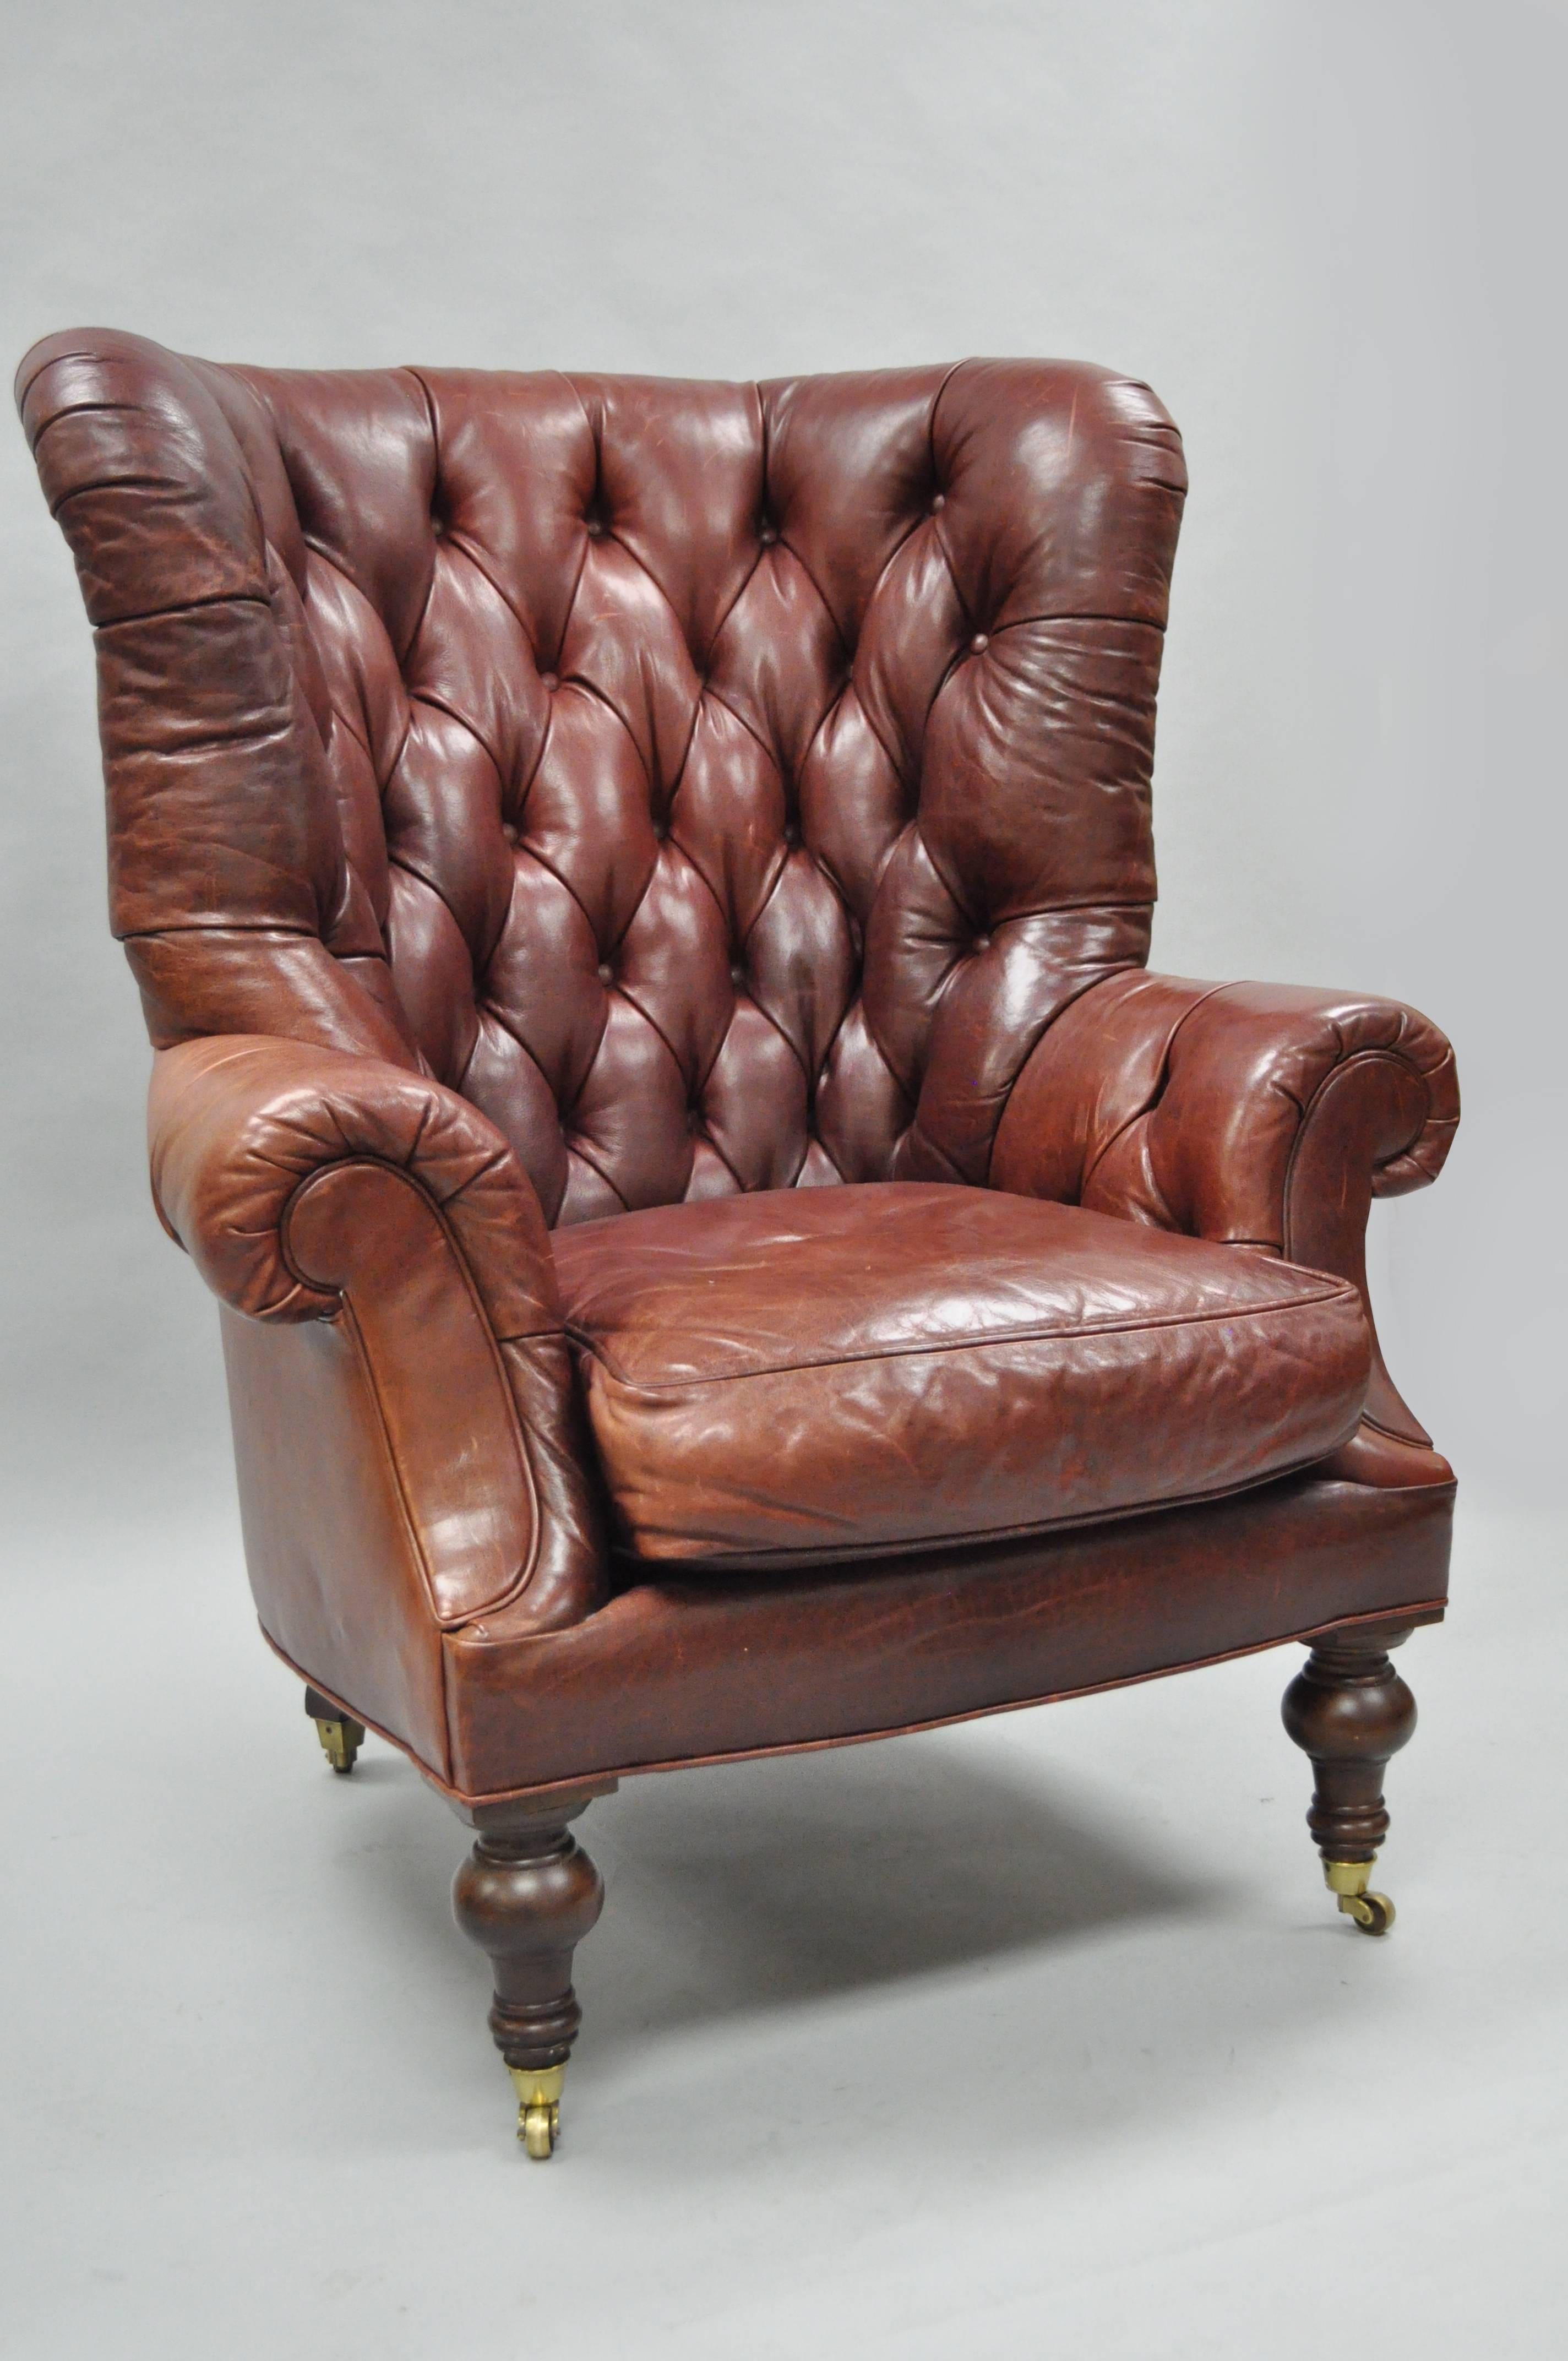 Quality 20th century oversized brown tufted leather English Chesterfield style lounge armchair by Lillian August. This remarkable item features a large stately solid wood wing back frame, button tufted leather upholstery, turn carved wooden legs